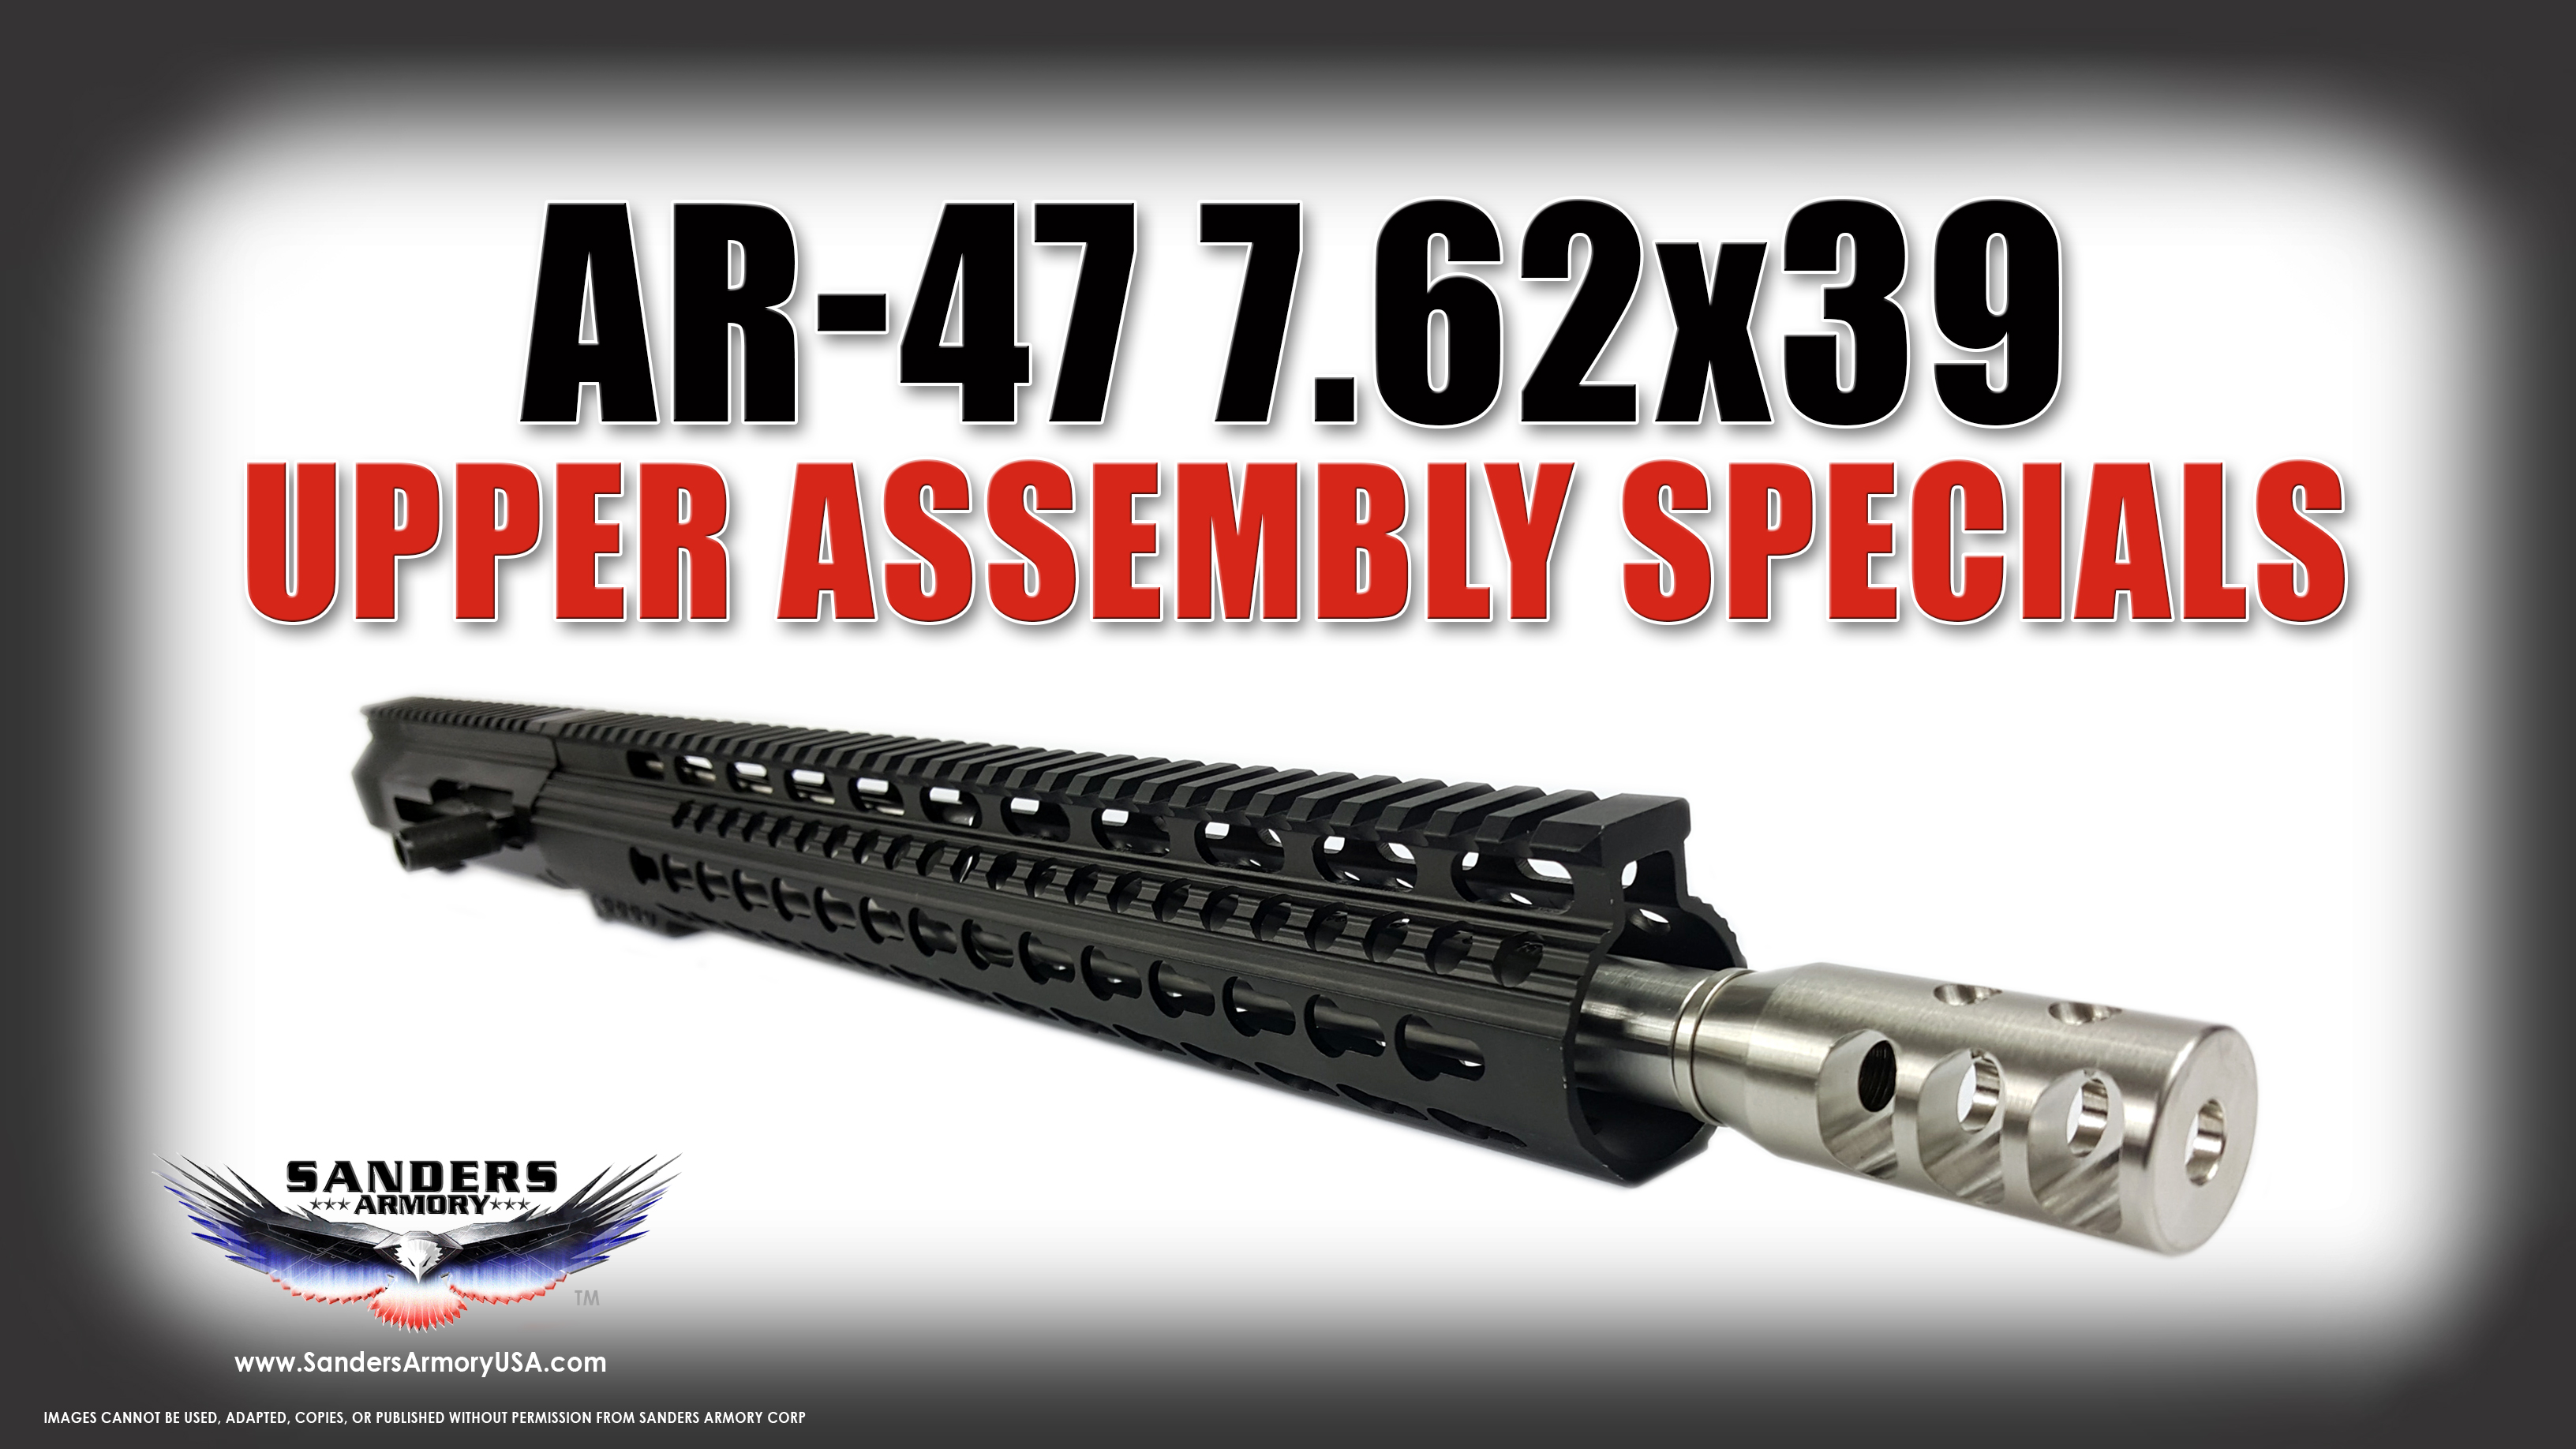 Sanders Armory AR-47 7.62x39 Upper Assembly